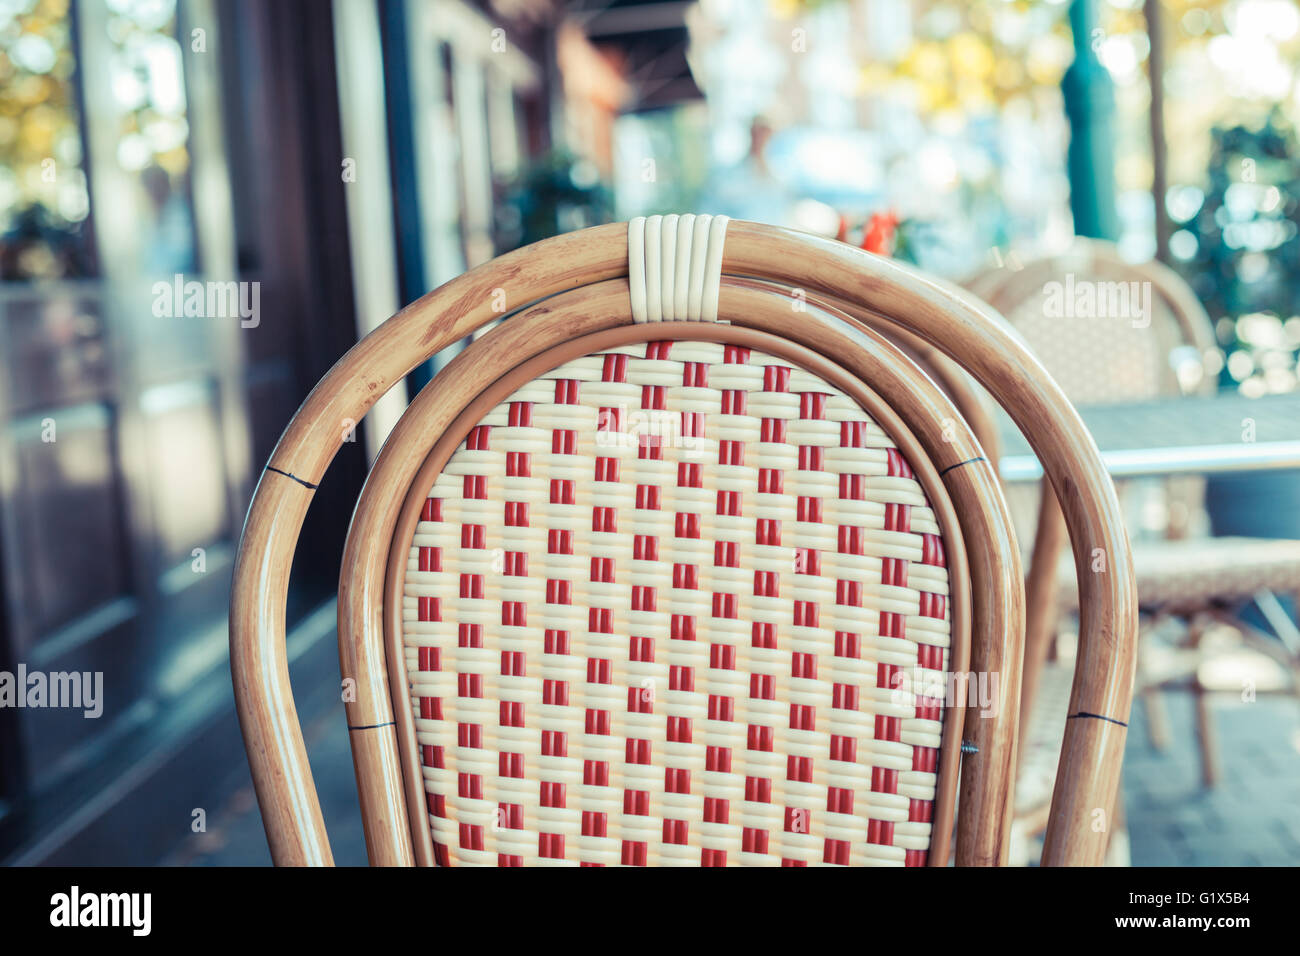 An empty chair outside a cafe in the street Stock Photo